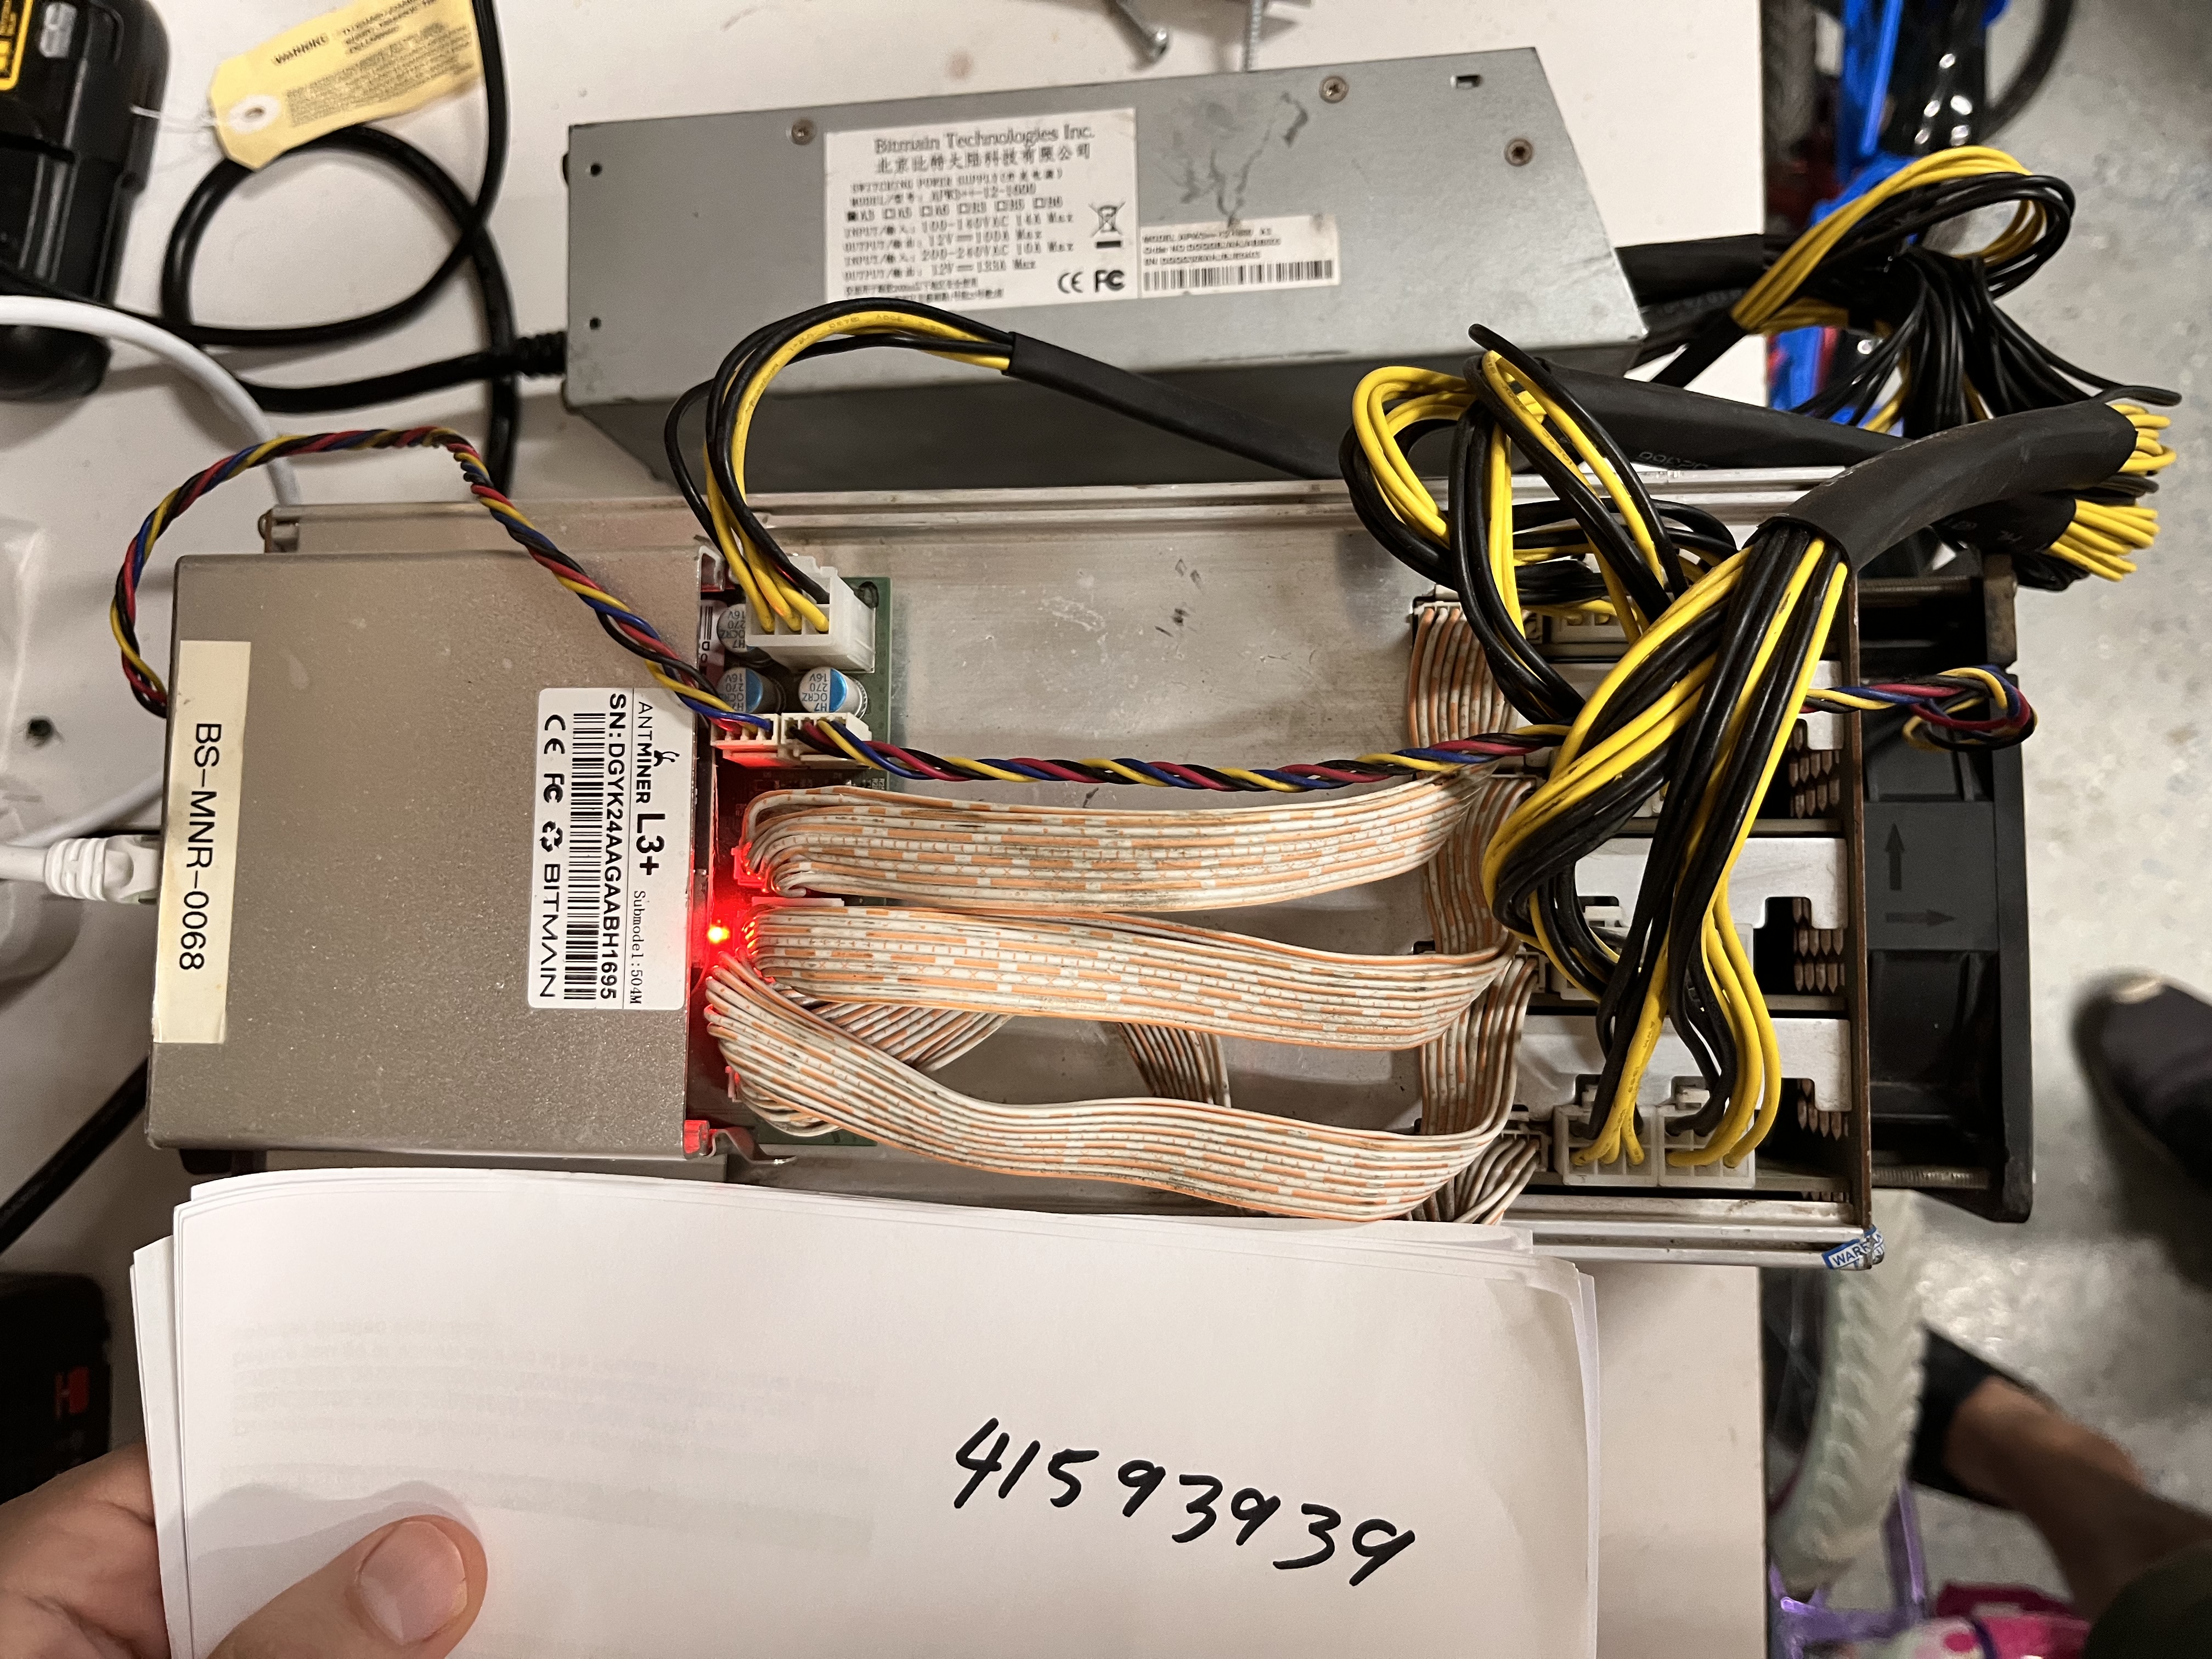 Antminer L3 504 MH/s